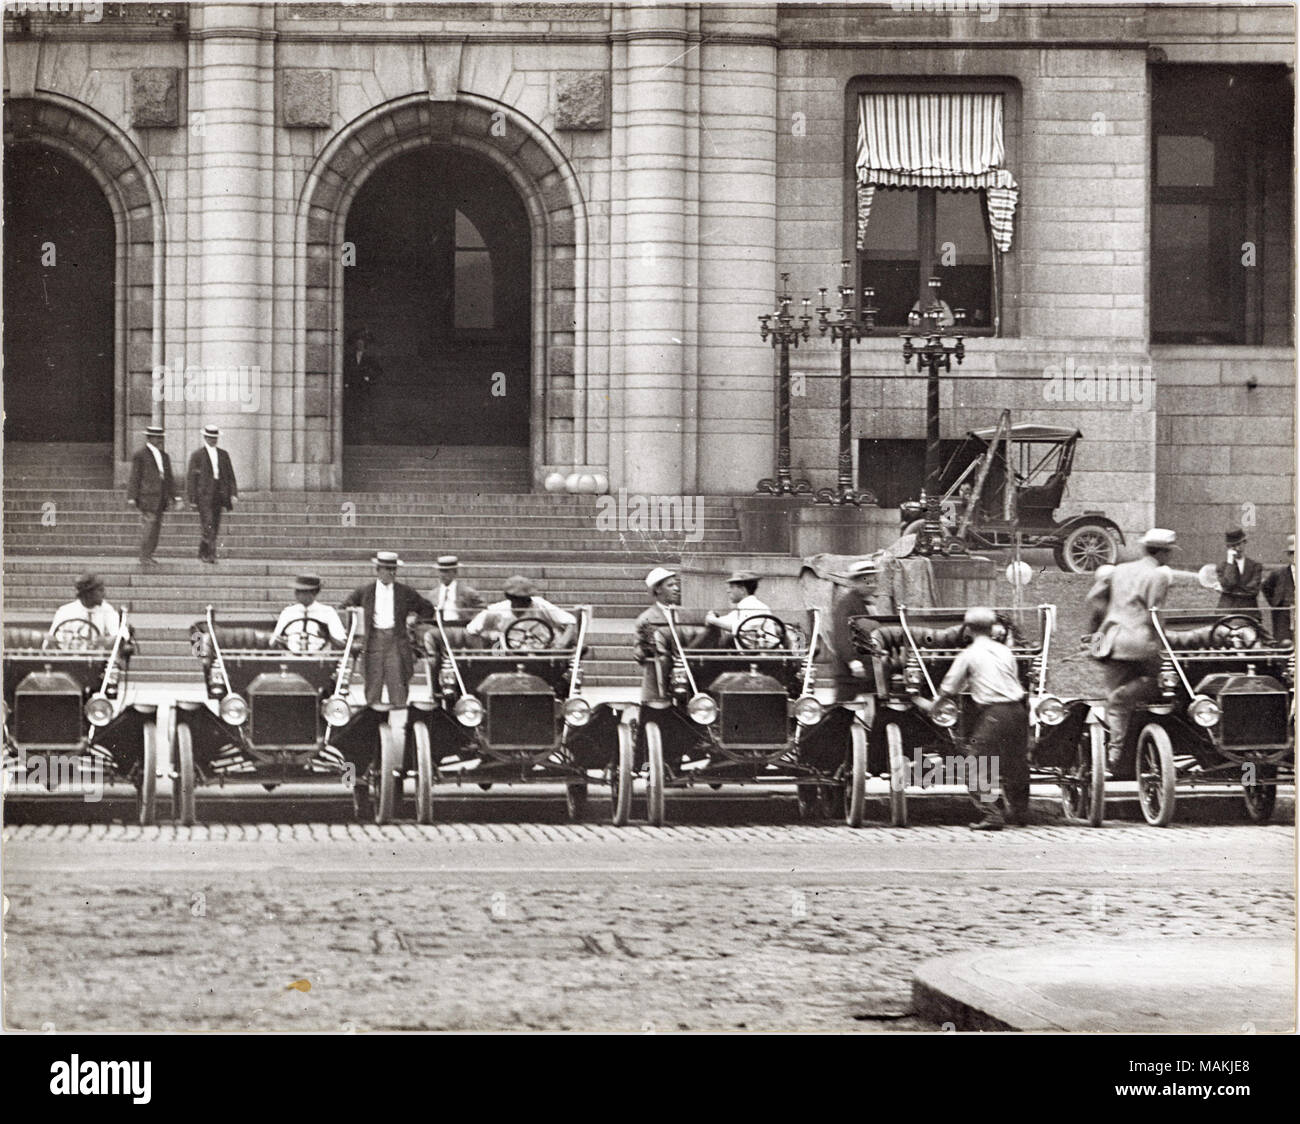 Horizontal, black and white photograph showing a row of six Model T Fords parked in front of St. Louis City Hall, probably near the intersection of 12th Street, now Tucker Boulevard, and Walnut Street . Men are seated in the driver's seat of four of the cars, and one man climbs in or out of a fifth car. Other men can be seen walking on the sidewalk in the background. A typed note on the back of the print, possibly an exhibit caption, reads: 'Model T Fords, ca. 1909. Fourteen of these automobiles were bought by City Hall. The cars had a 4 cylinder engine and 2 speed transmission, features which Stock Photo